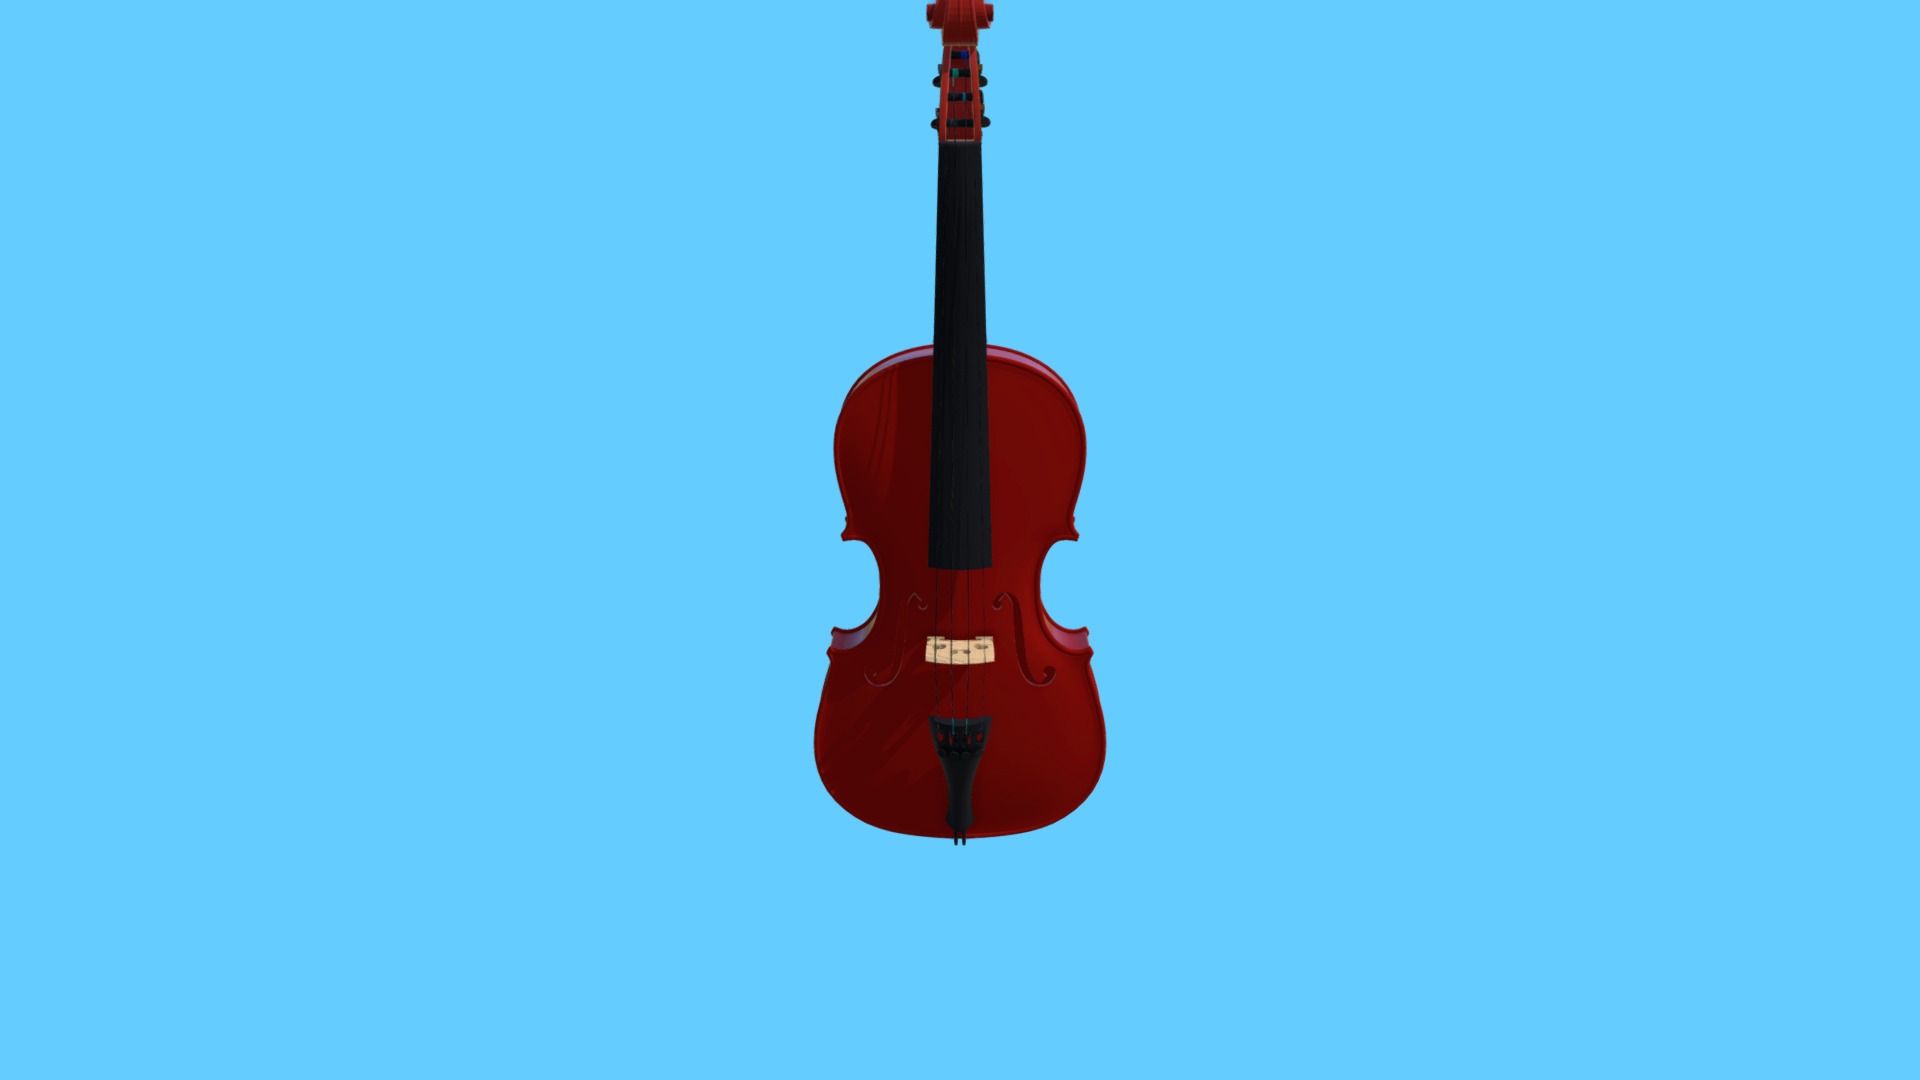 3D model Violin - This is a 3D model of the Violin. The 3D model is about a red guitar on a blue background.